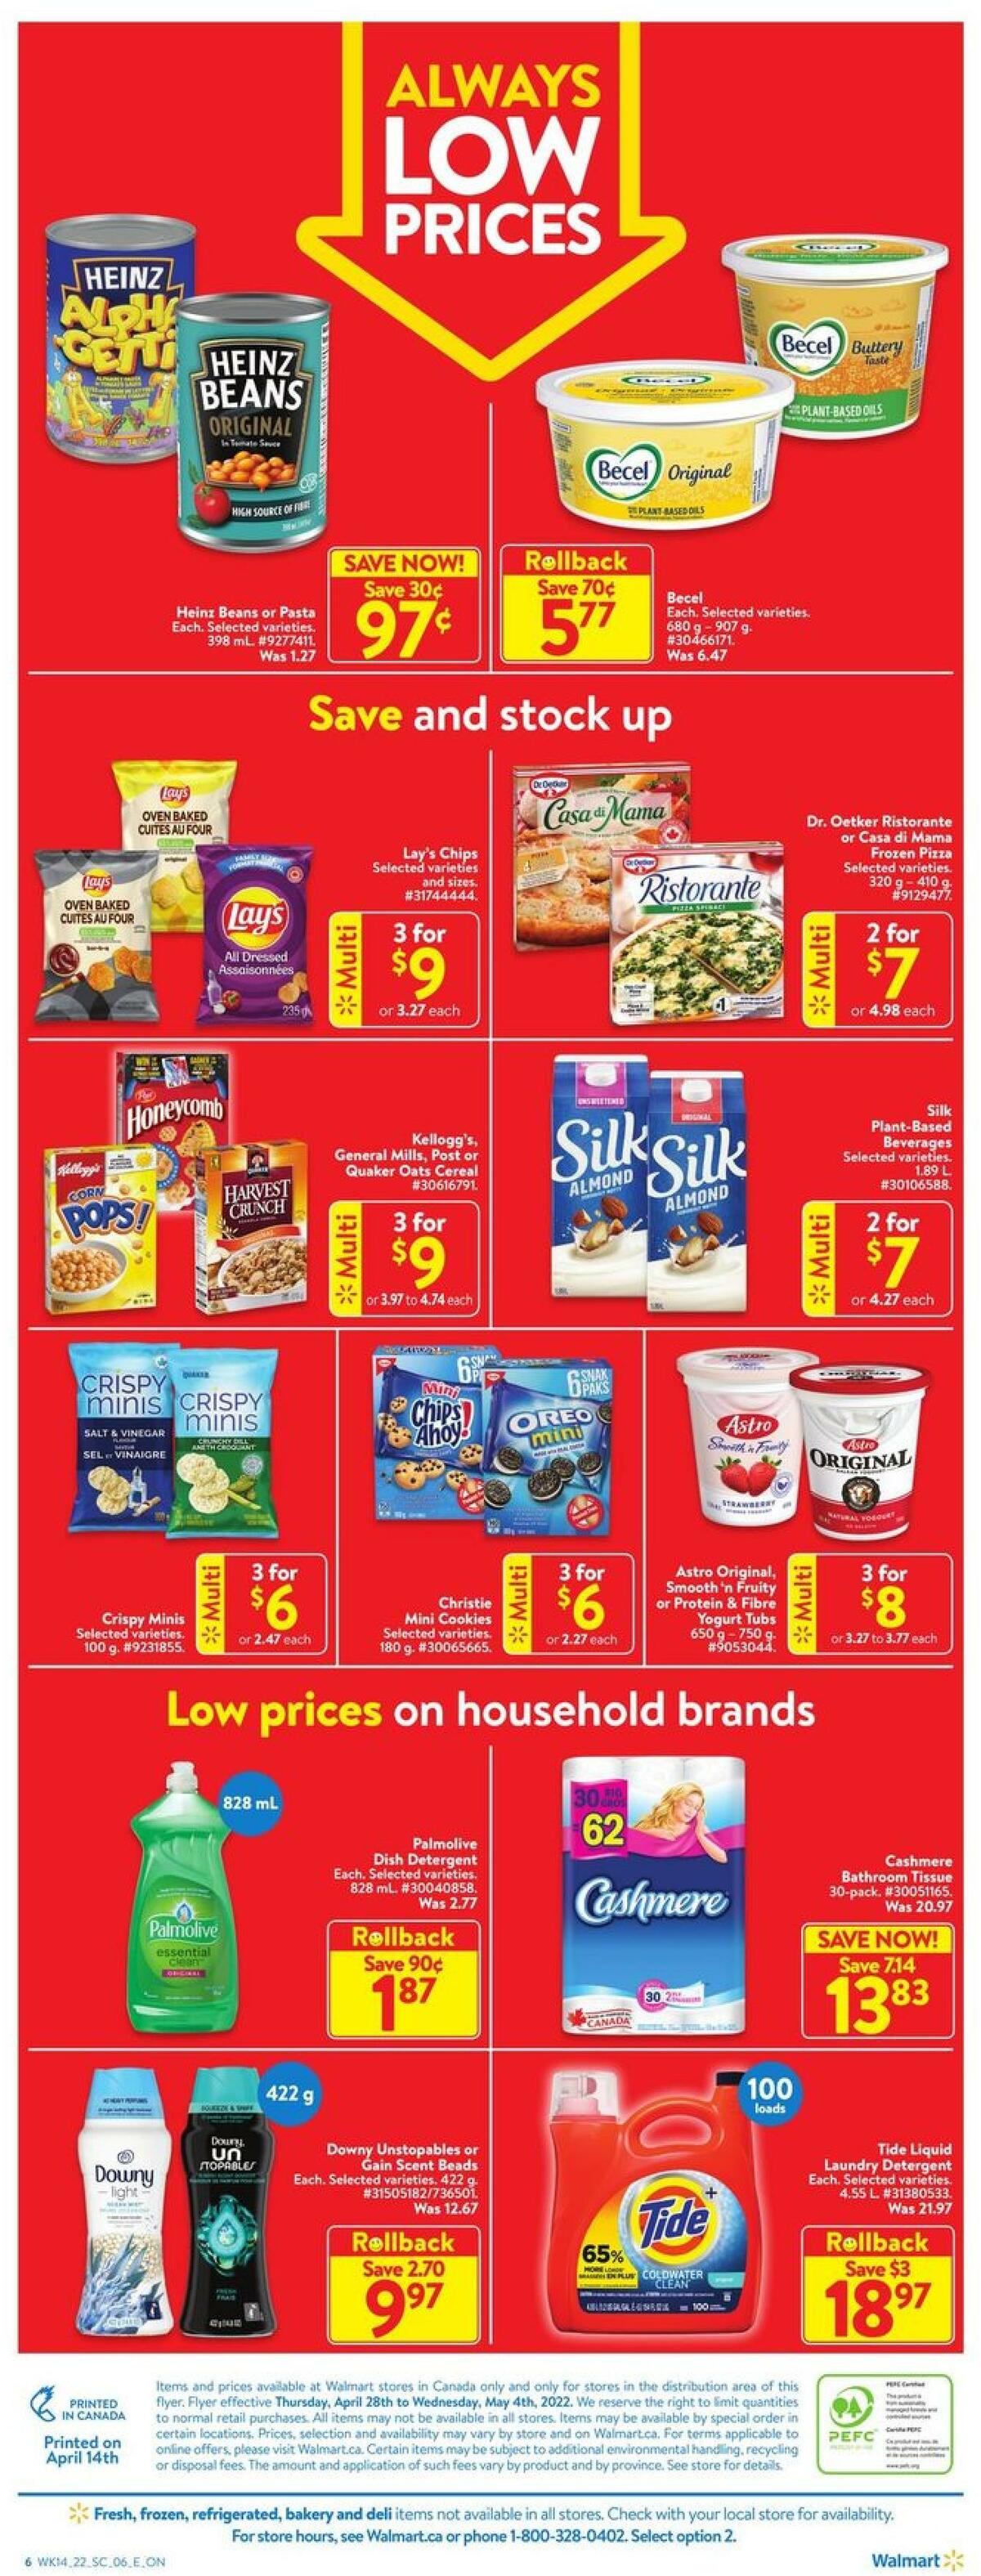 Walmart Flyer from April 28